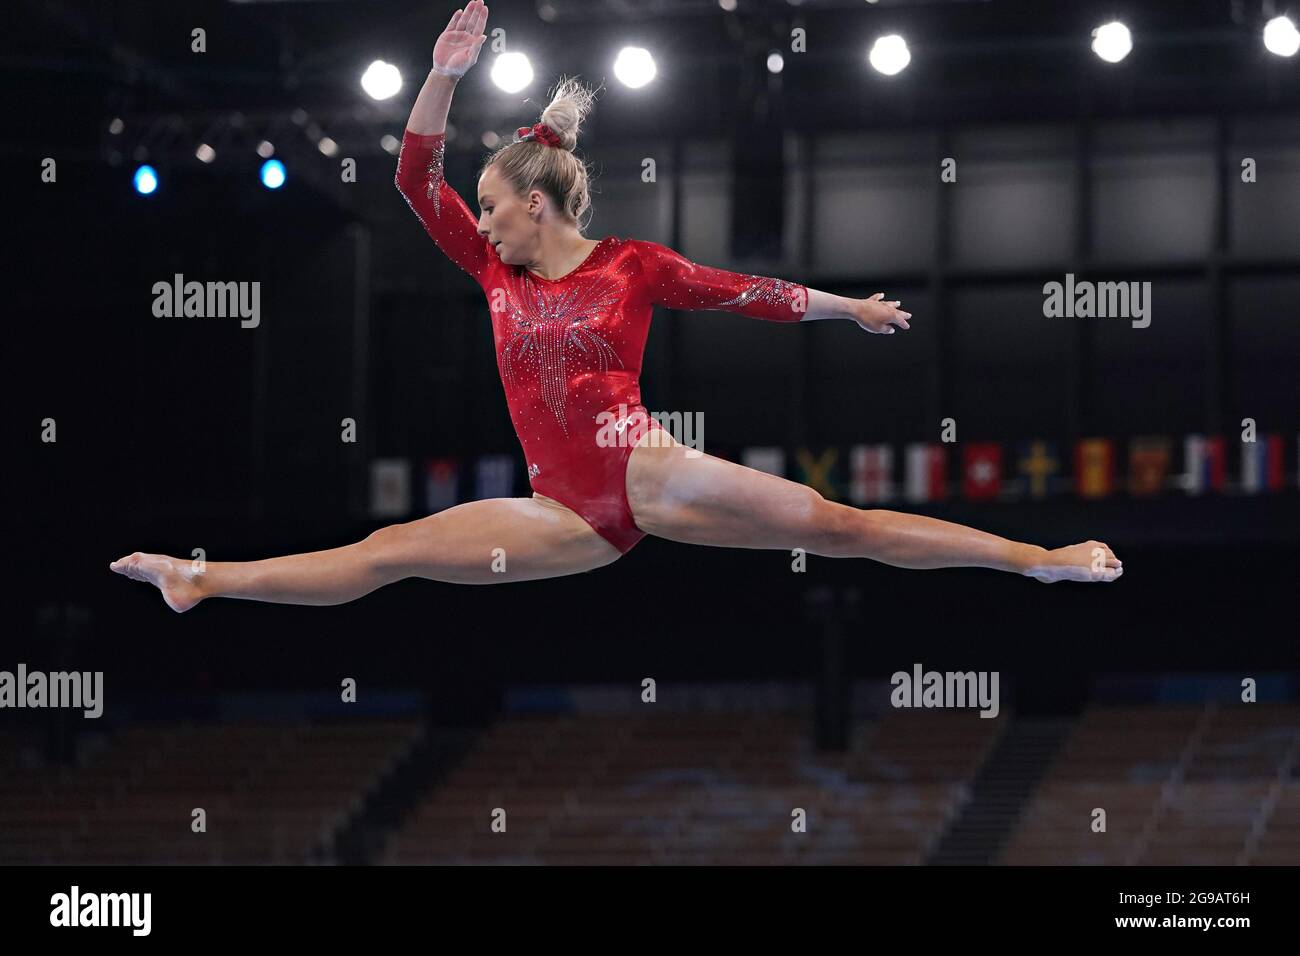 Tokyo, Japan. 25th July, 2021. United States Artistic Gymnast Mykayla Skinner during her qualifying round on the balance beam at Ariake Gymnastics Centre at the Tokyo Olympic Games in Tokyo, Japan, on Sunday July 25, 2021. Photo by Richard Ellis/UPI. Credit: UPI/Alamy Live News Stock Photo